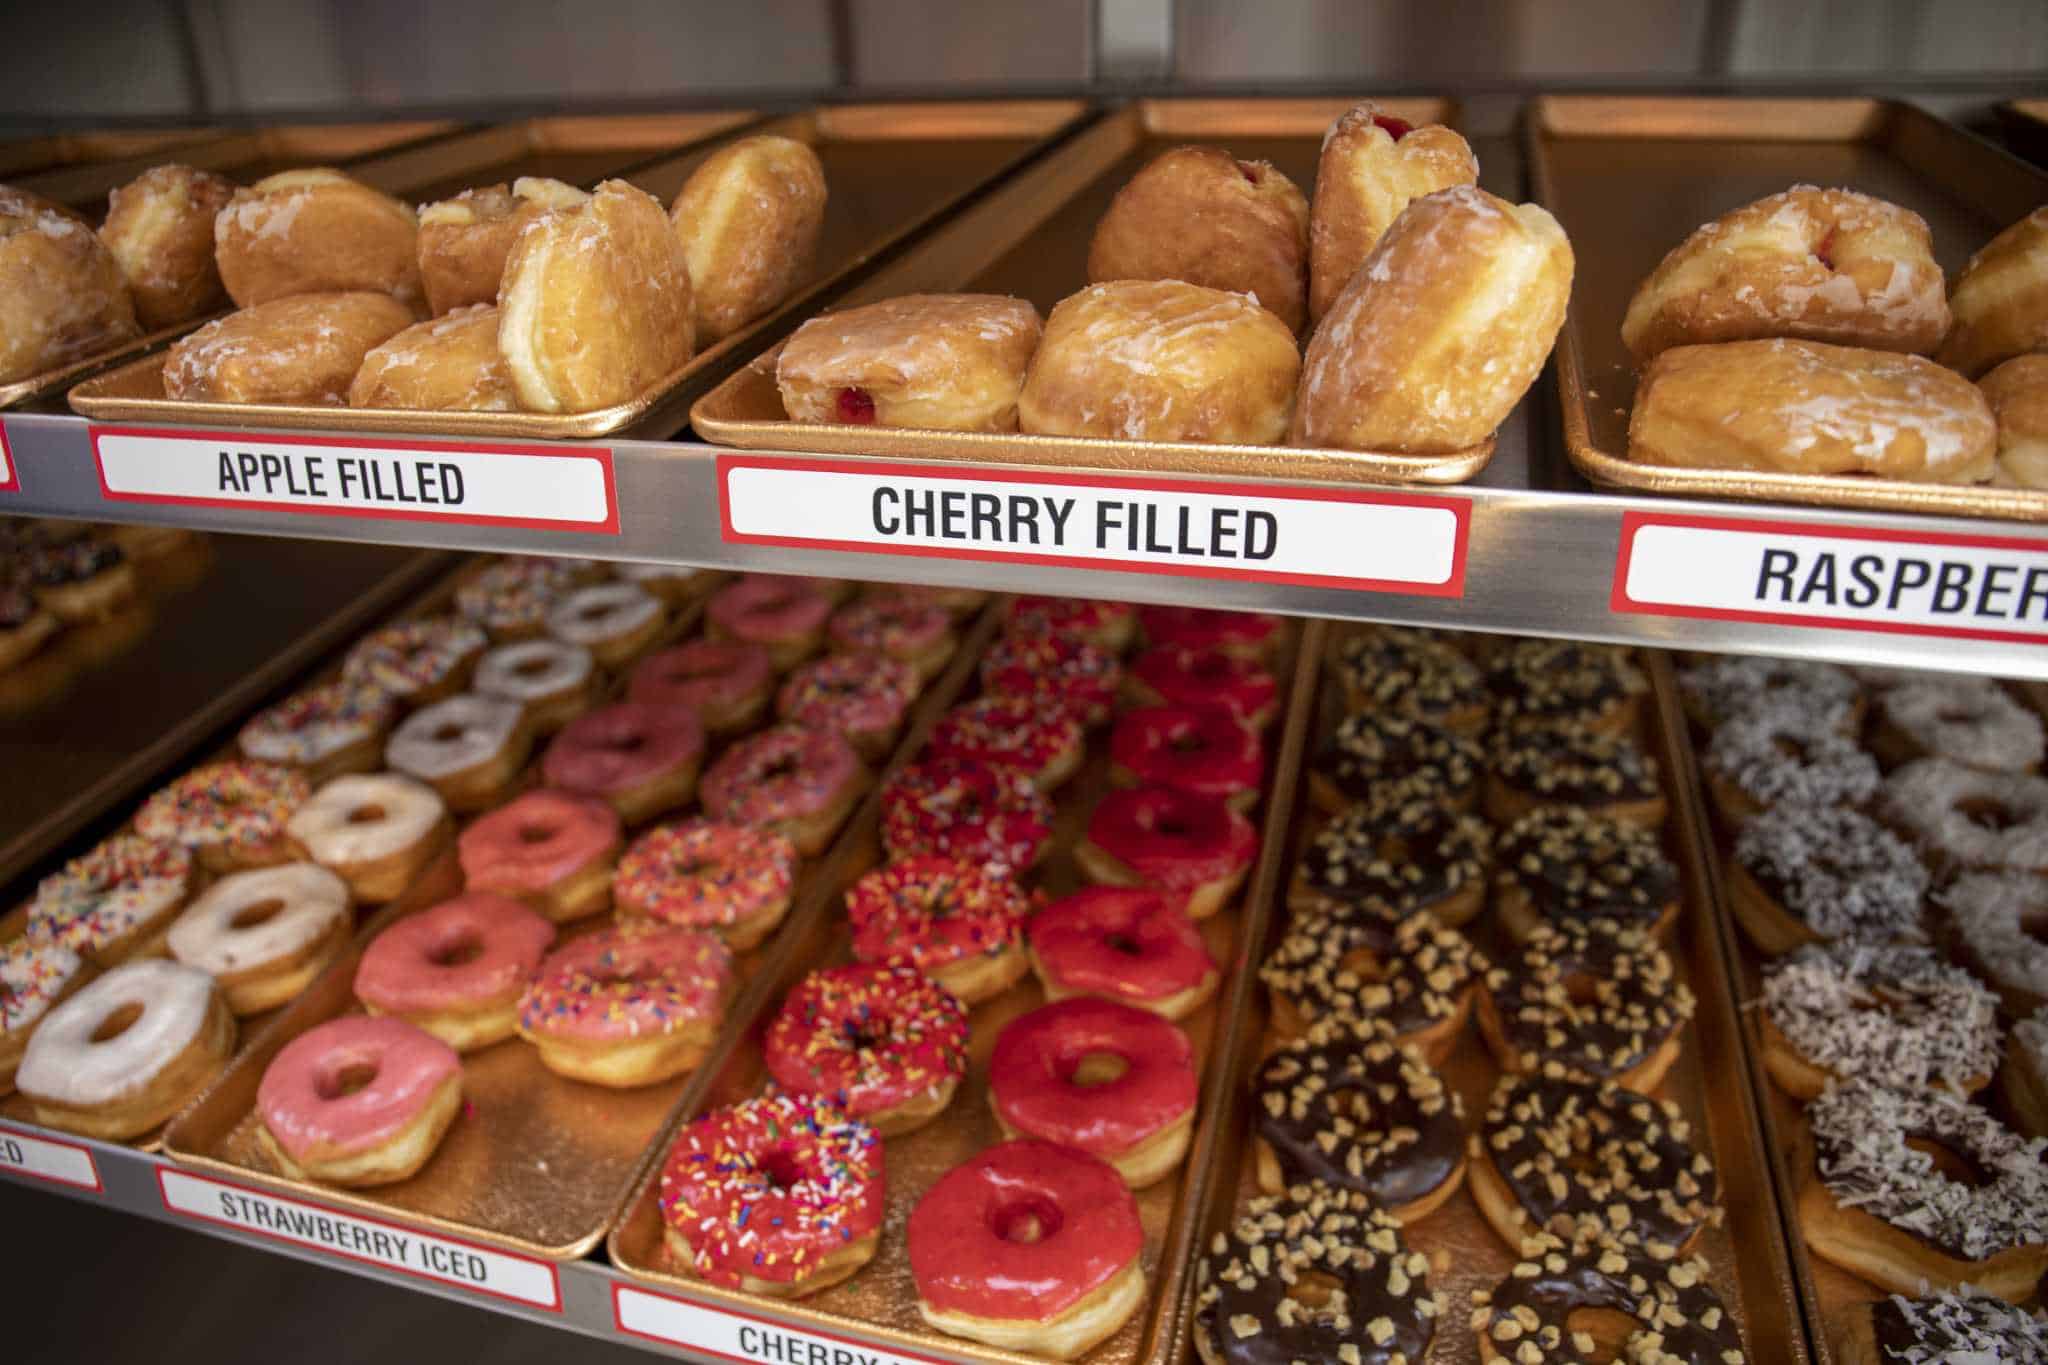 There are over 60 donuts flavors to choose from